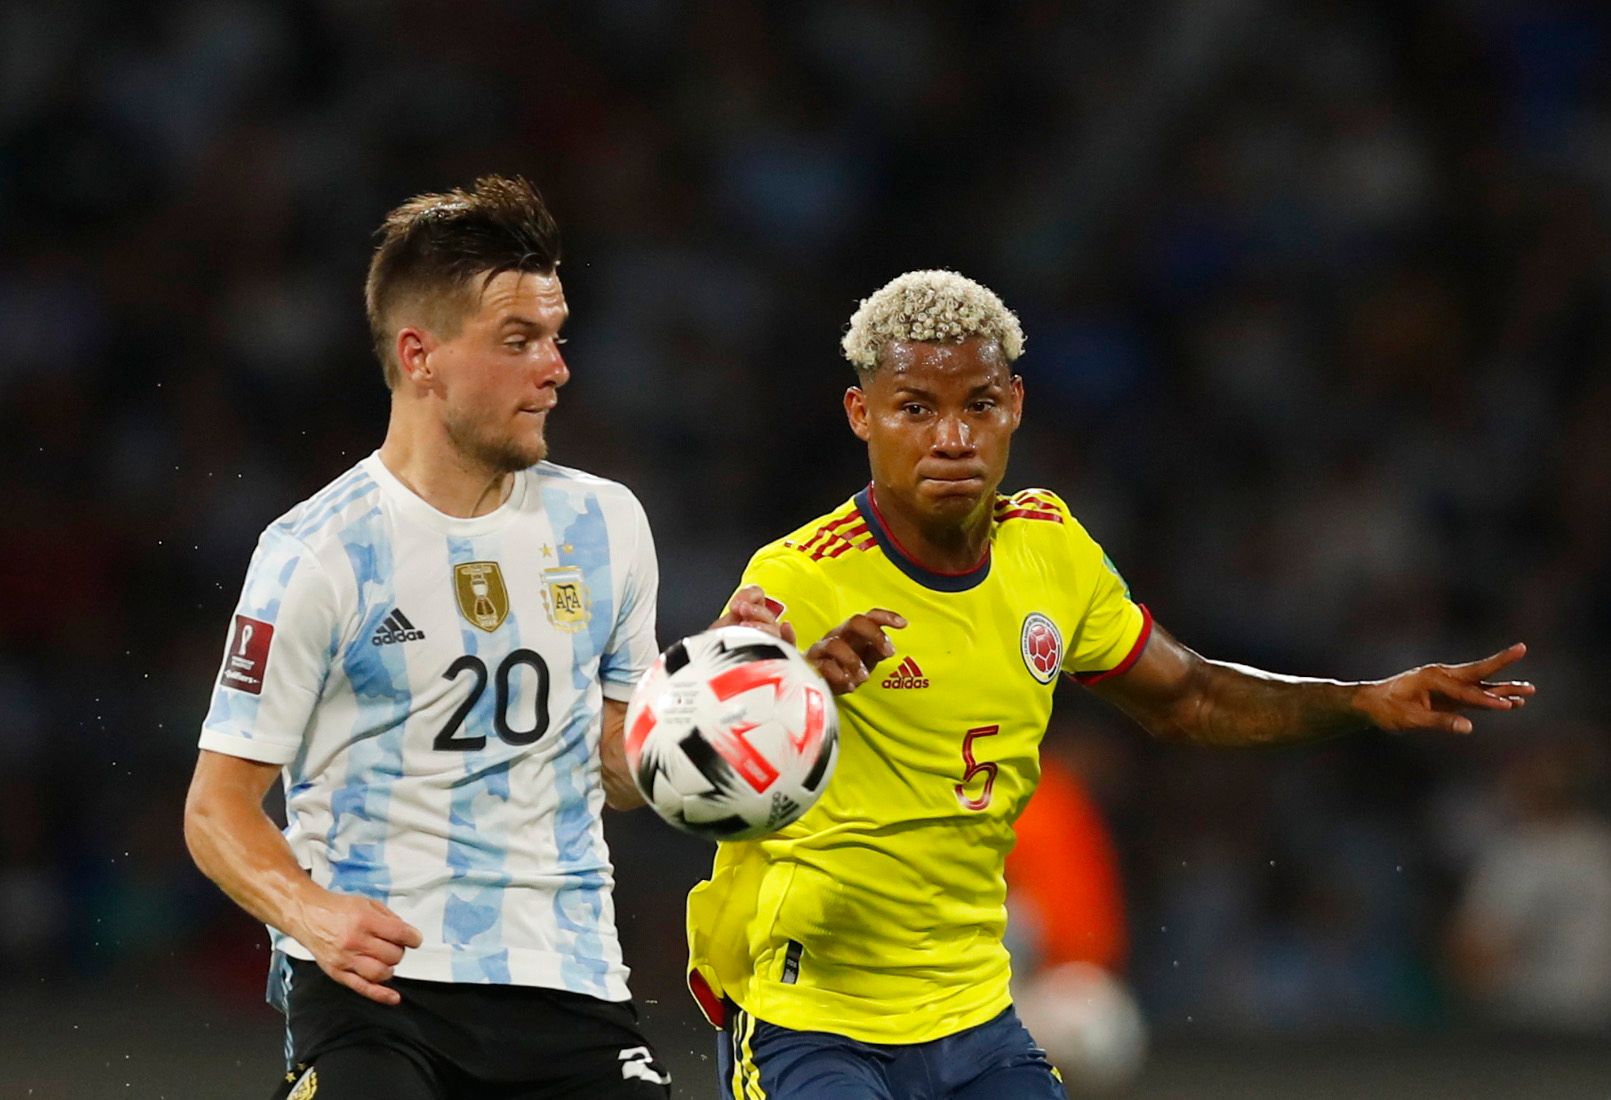 Soccer Football - World Cup - South American Qualifiers - Argentina v Colombia - Estadio Mario Alberto Kempes, Cordoba, Argentina - February 1, 2022 Argentina's Giovani Lo Celso in action with Colombia's Wilmar Barrios REUTERS/Agustin Marcarian